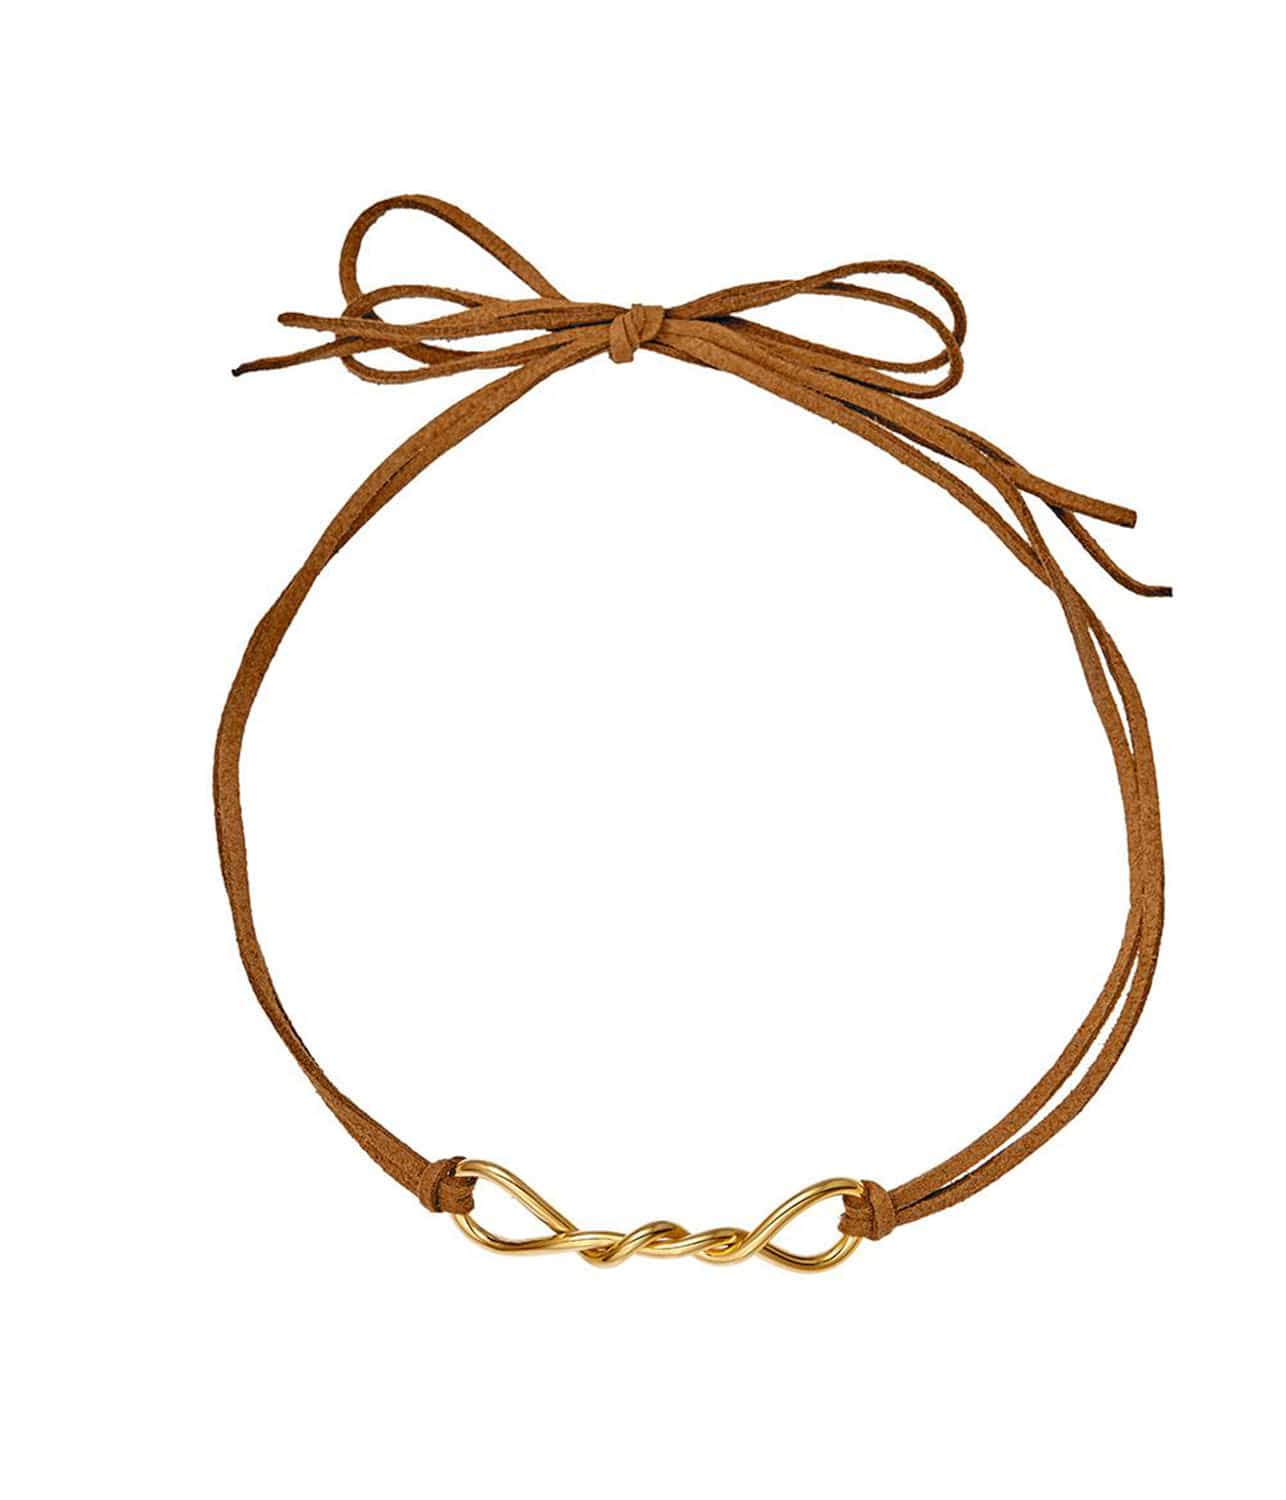 HOLLY RYAN SYNCHRONICITY NECKLACE - GOLD